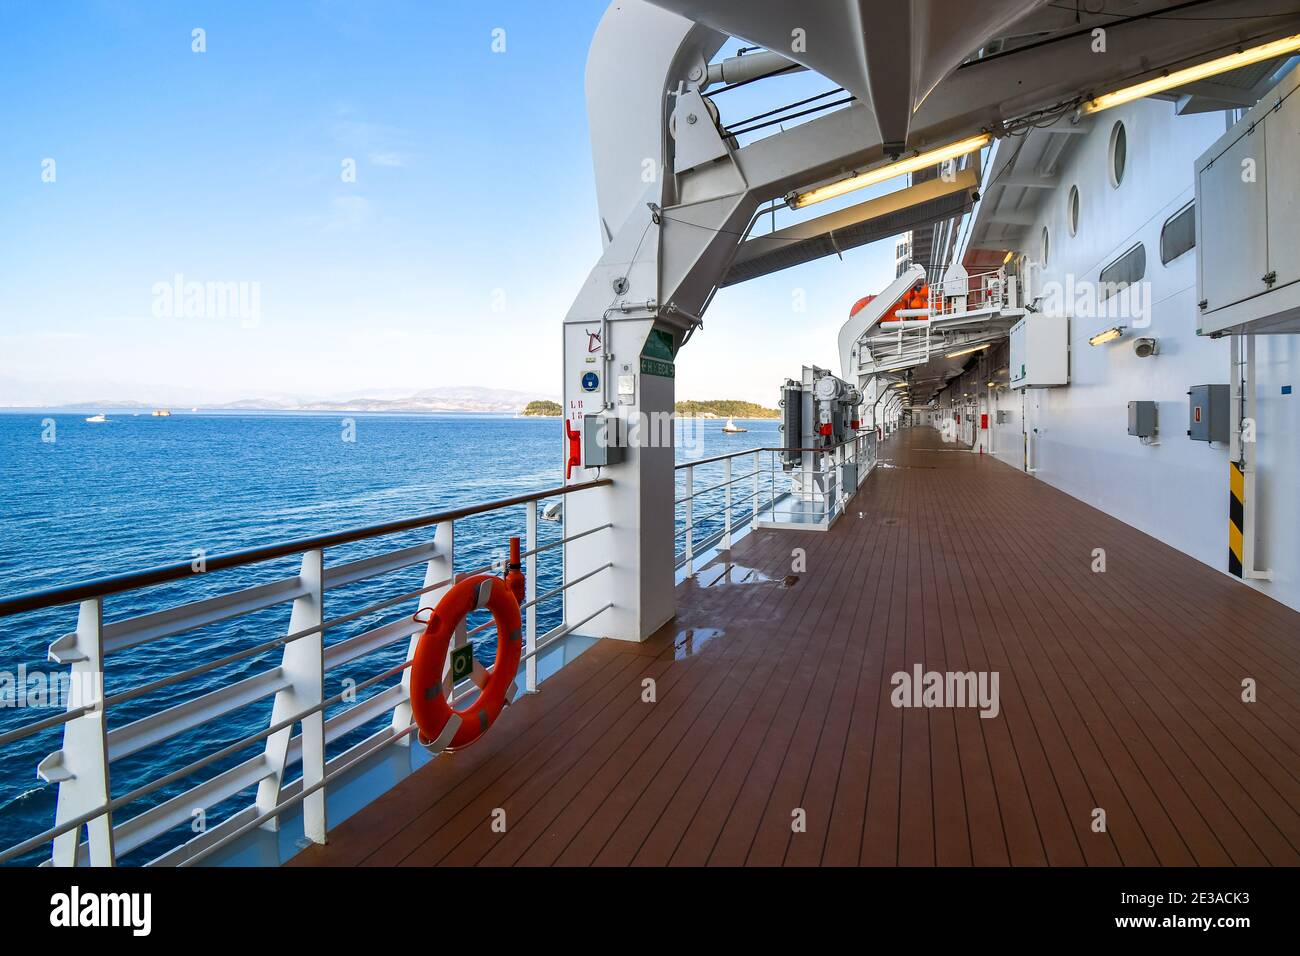 The empty outer deck of a cruise ship with no identifiable features cruising the Aegean Sea on a summer day. Stock Photo